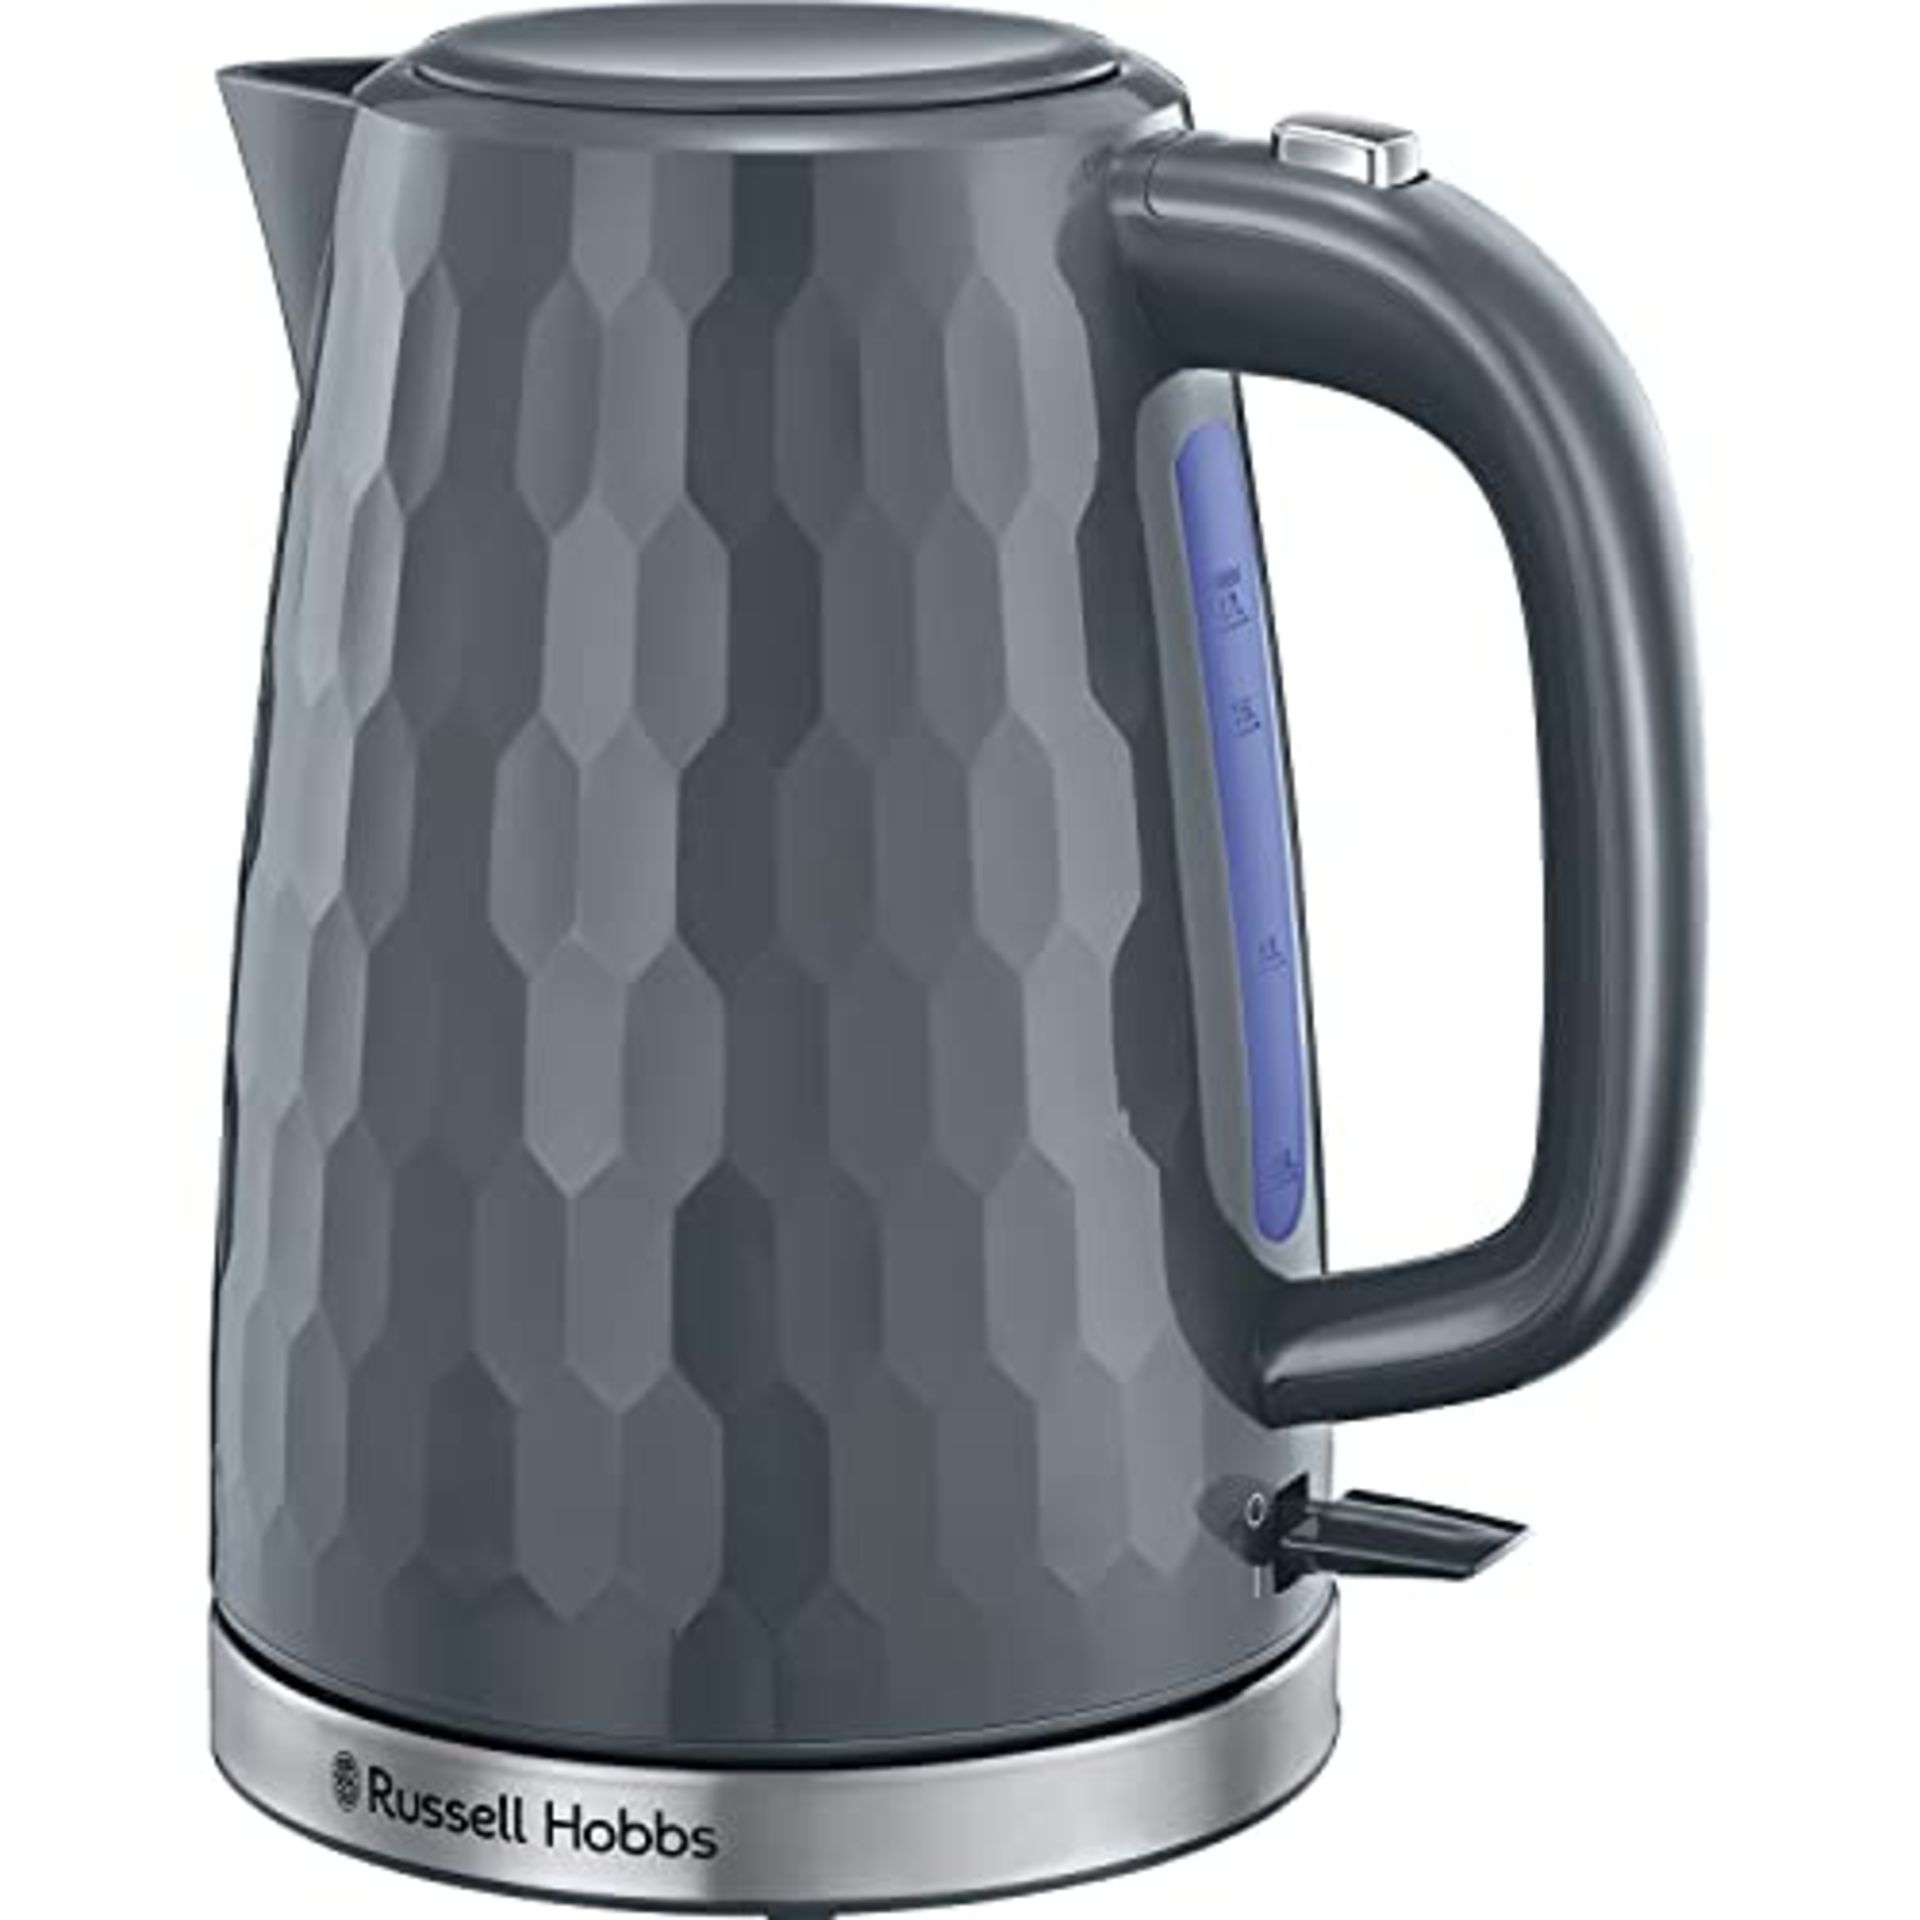 Russell Hobbs 26053 Cordless Electric Kettle - Contemporary Honeycomb Design with Fast